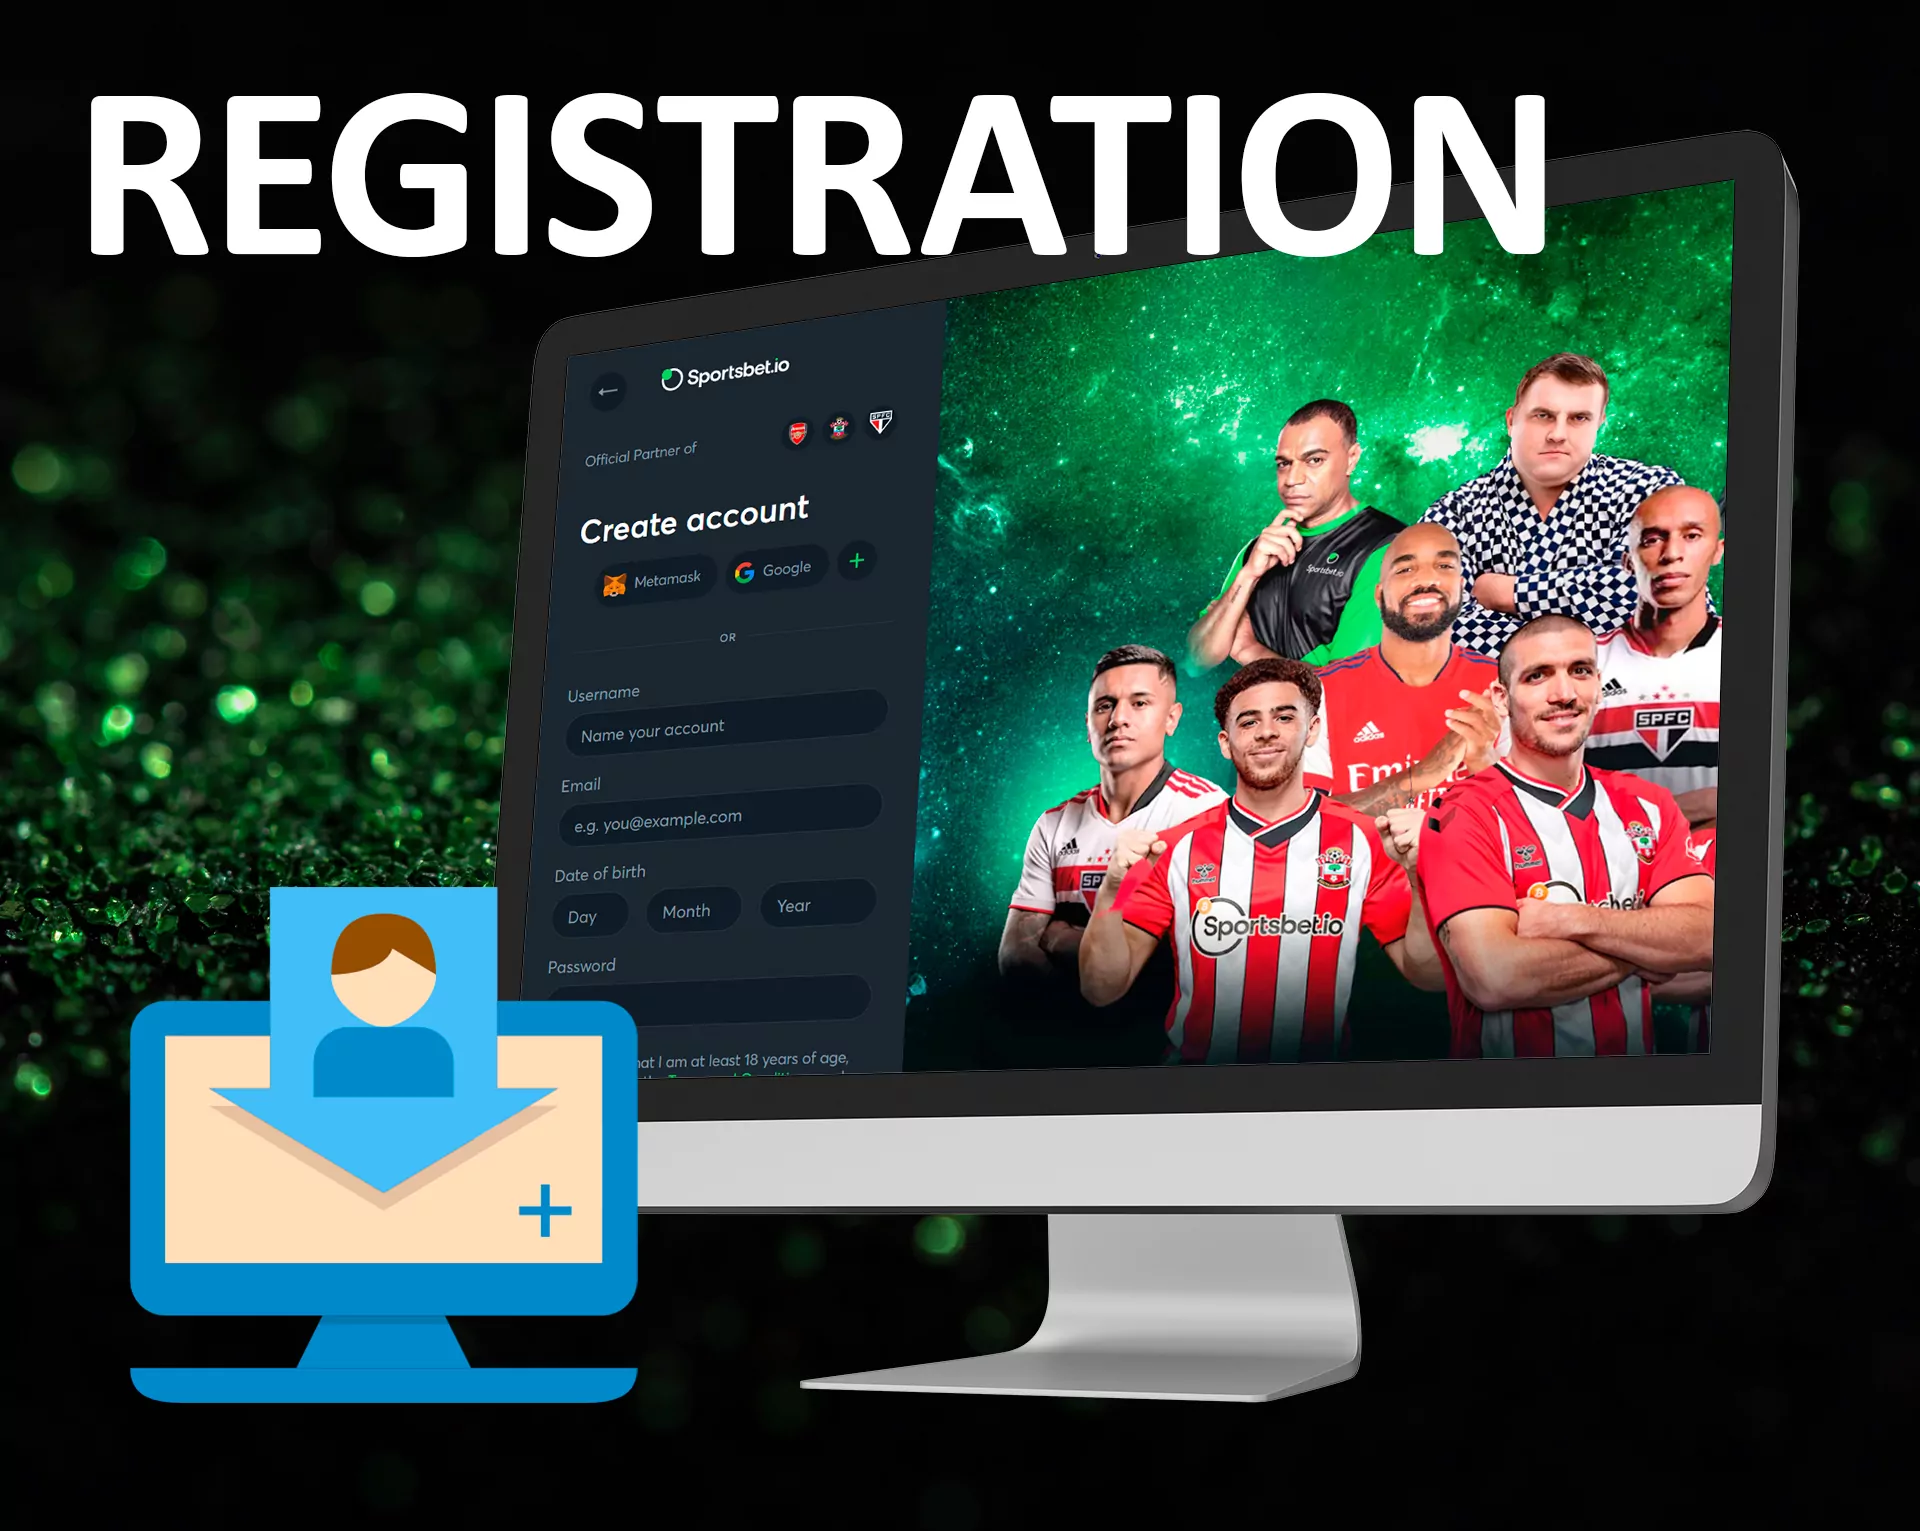 Open the main Sportsbet page and fill the registration form.